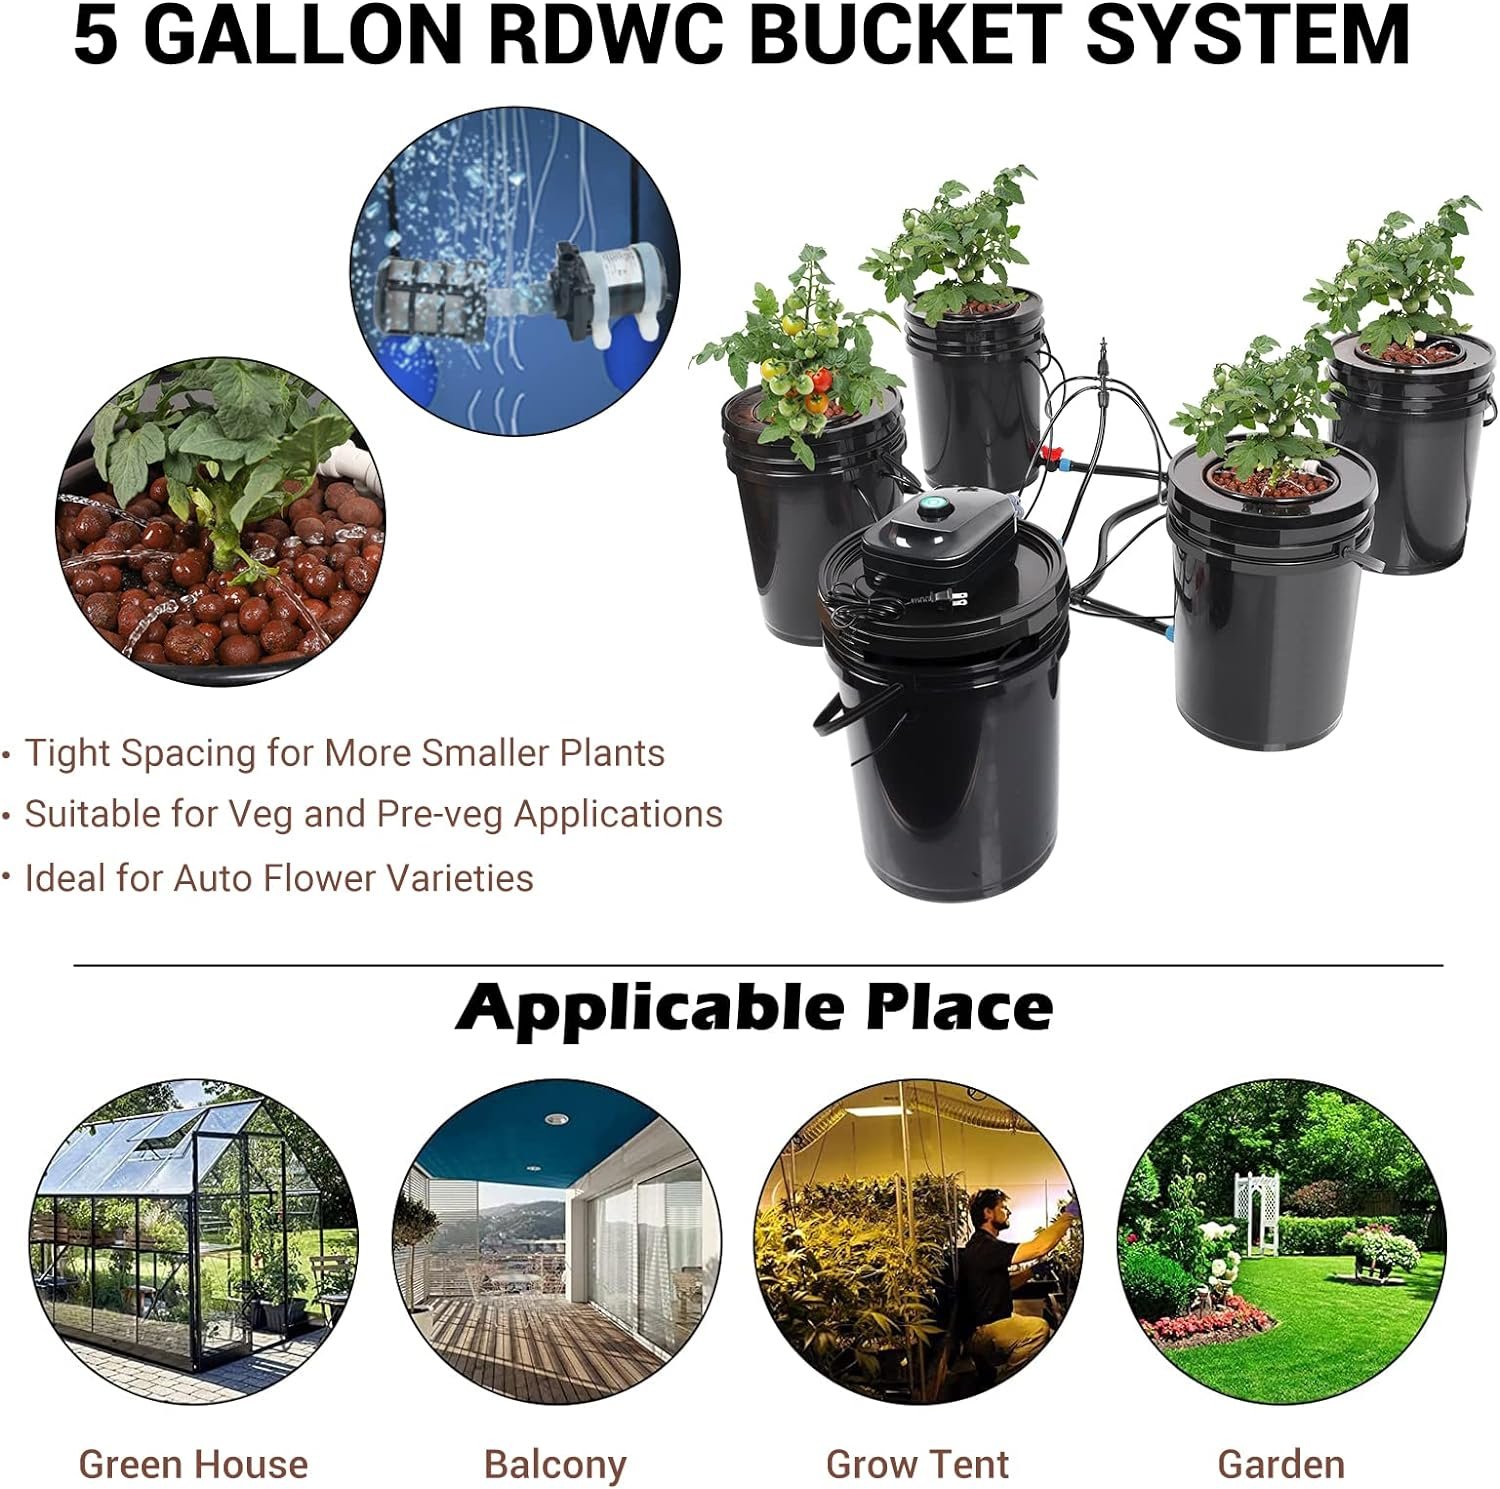 RDWC Top Feed Drip Hydroponics Systems 6 Buckets + Reservoir, Recirculating Deep Water Culture Hydroponic Bucket System, 5 Gallon Hydroponics Grow System Kit with Water Pump, Air Pump